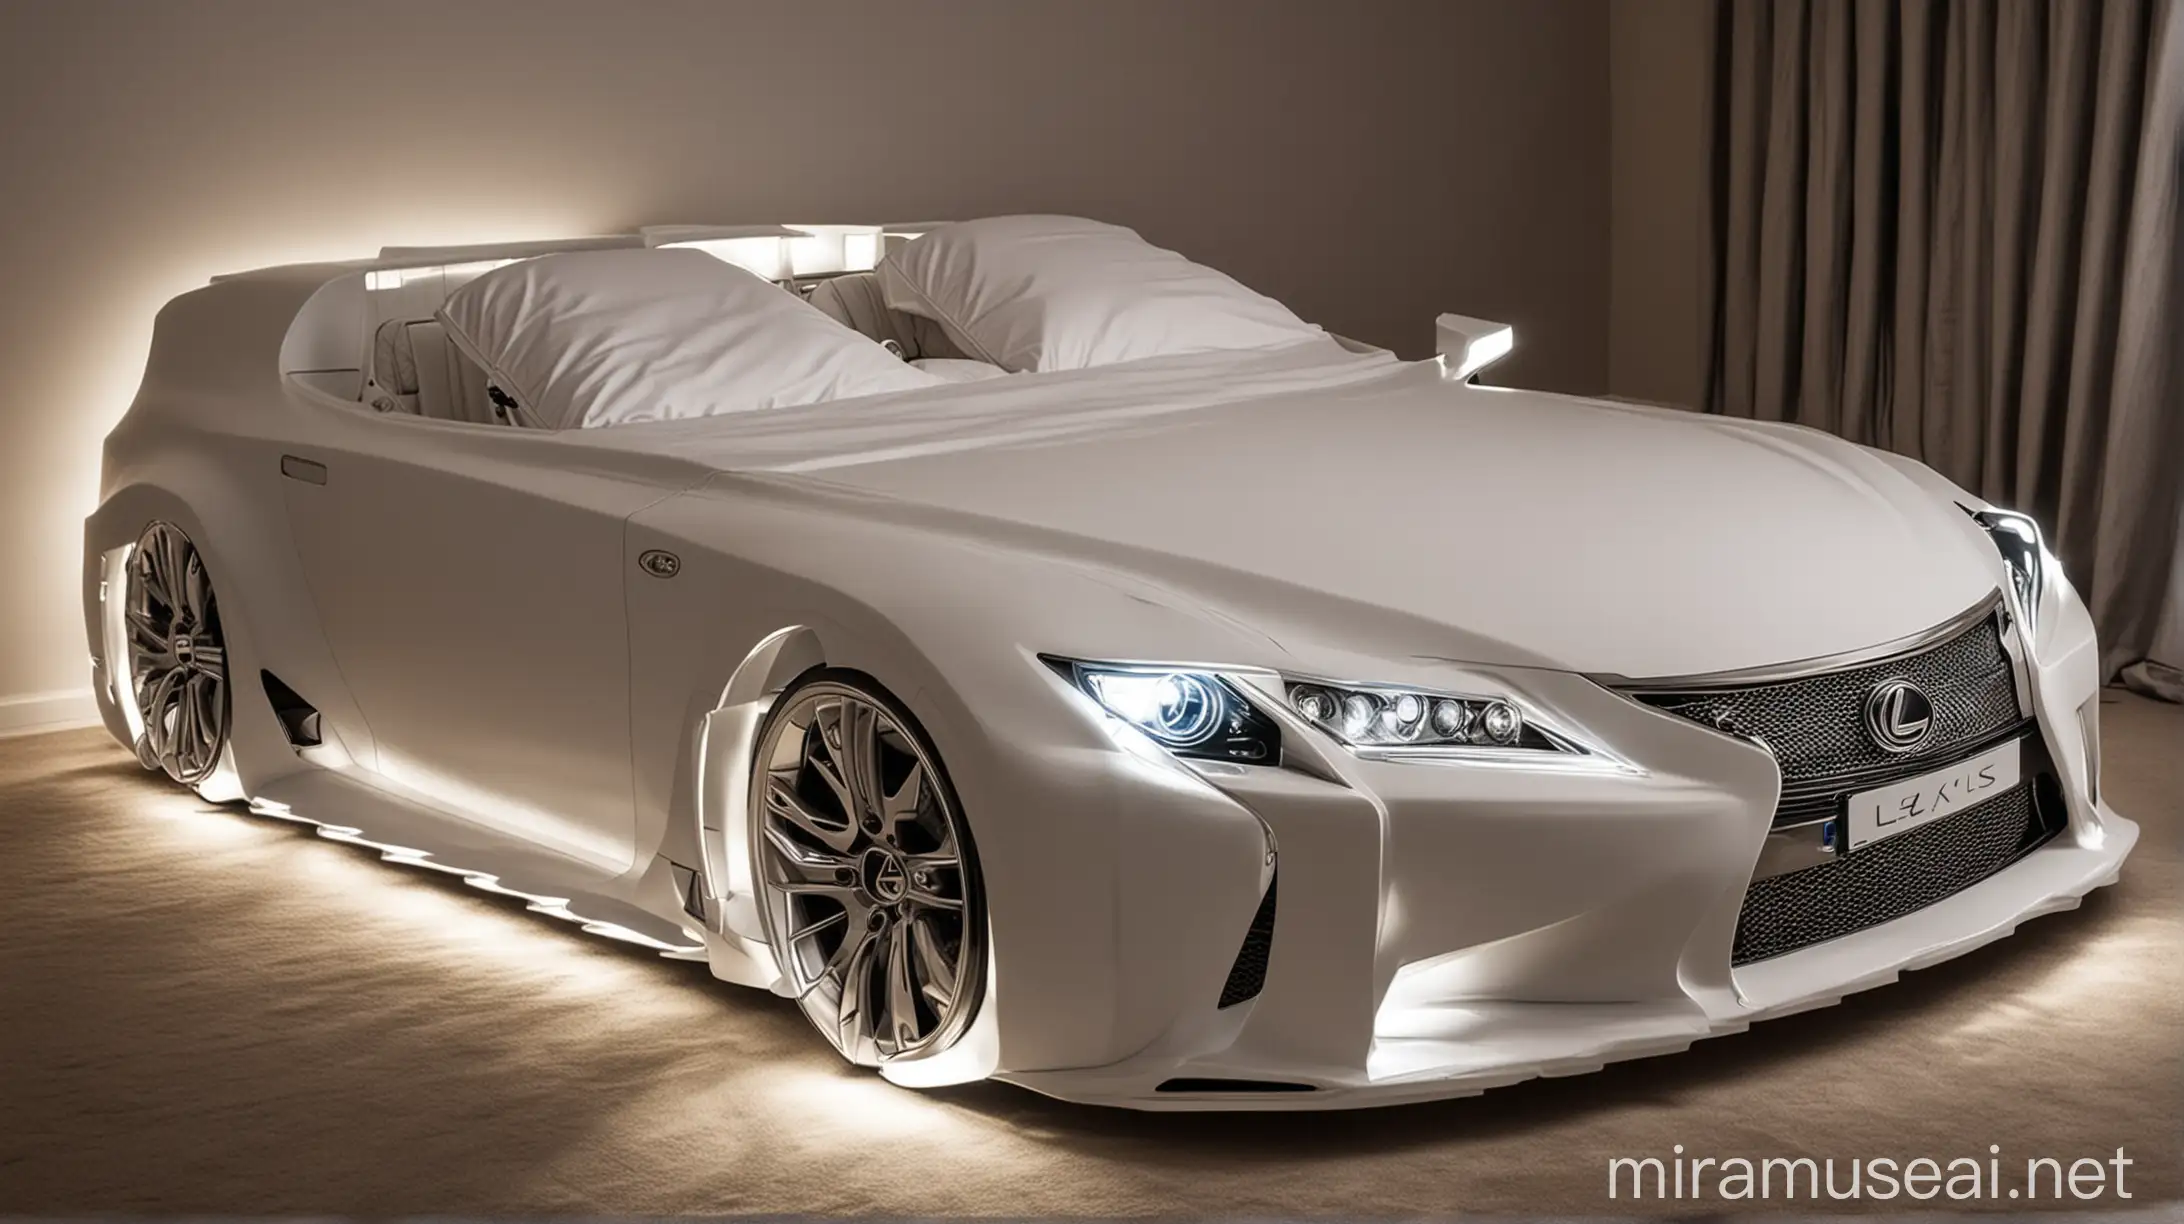 Double bed in the shape of a lexus car with headlights on